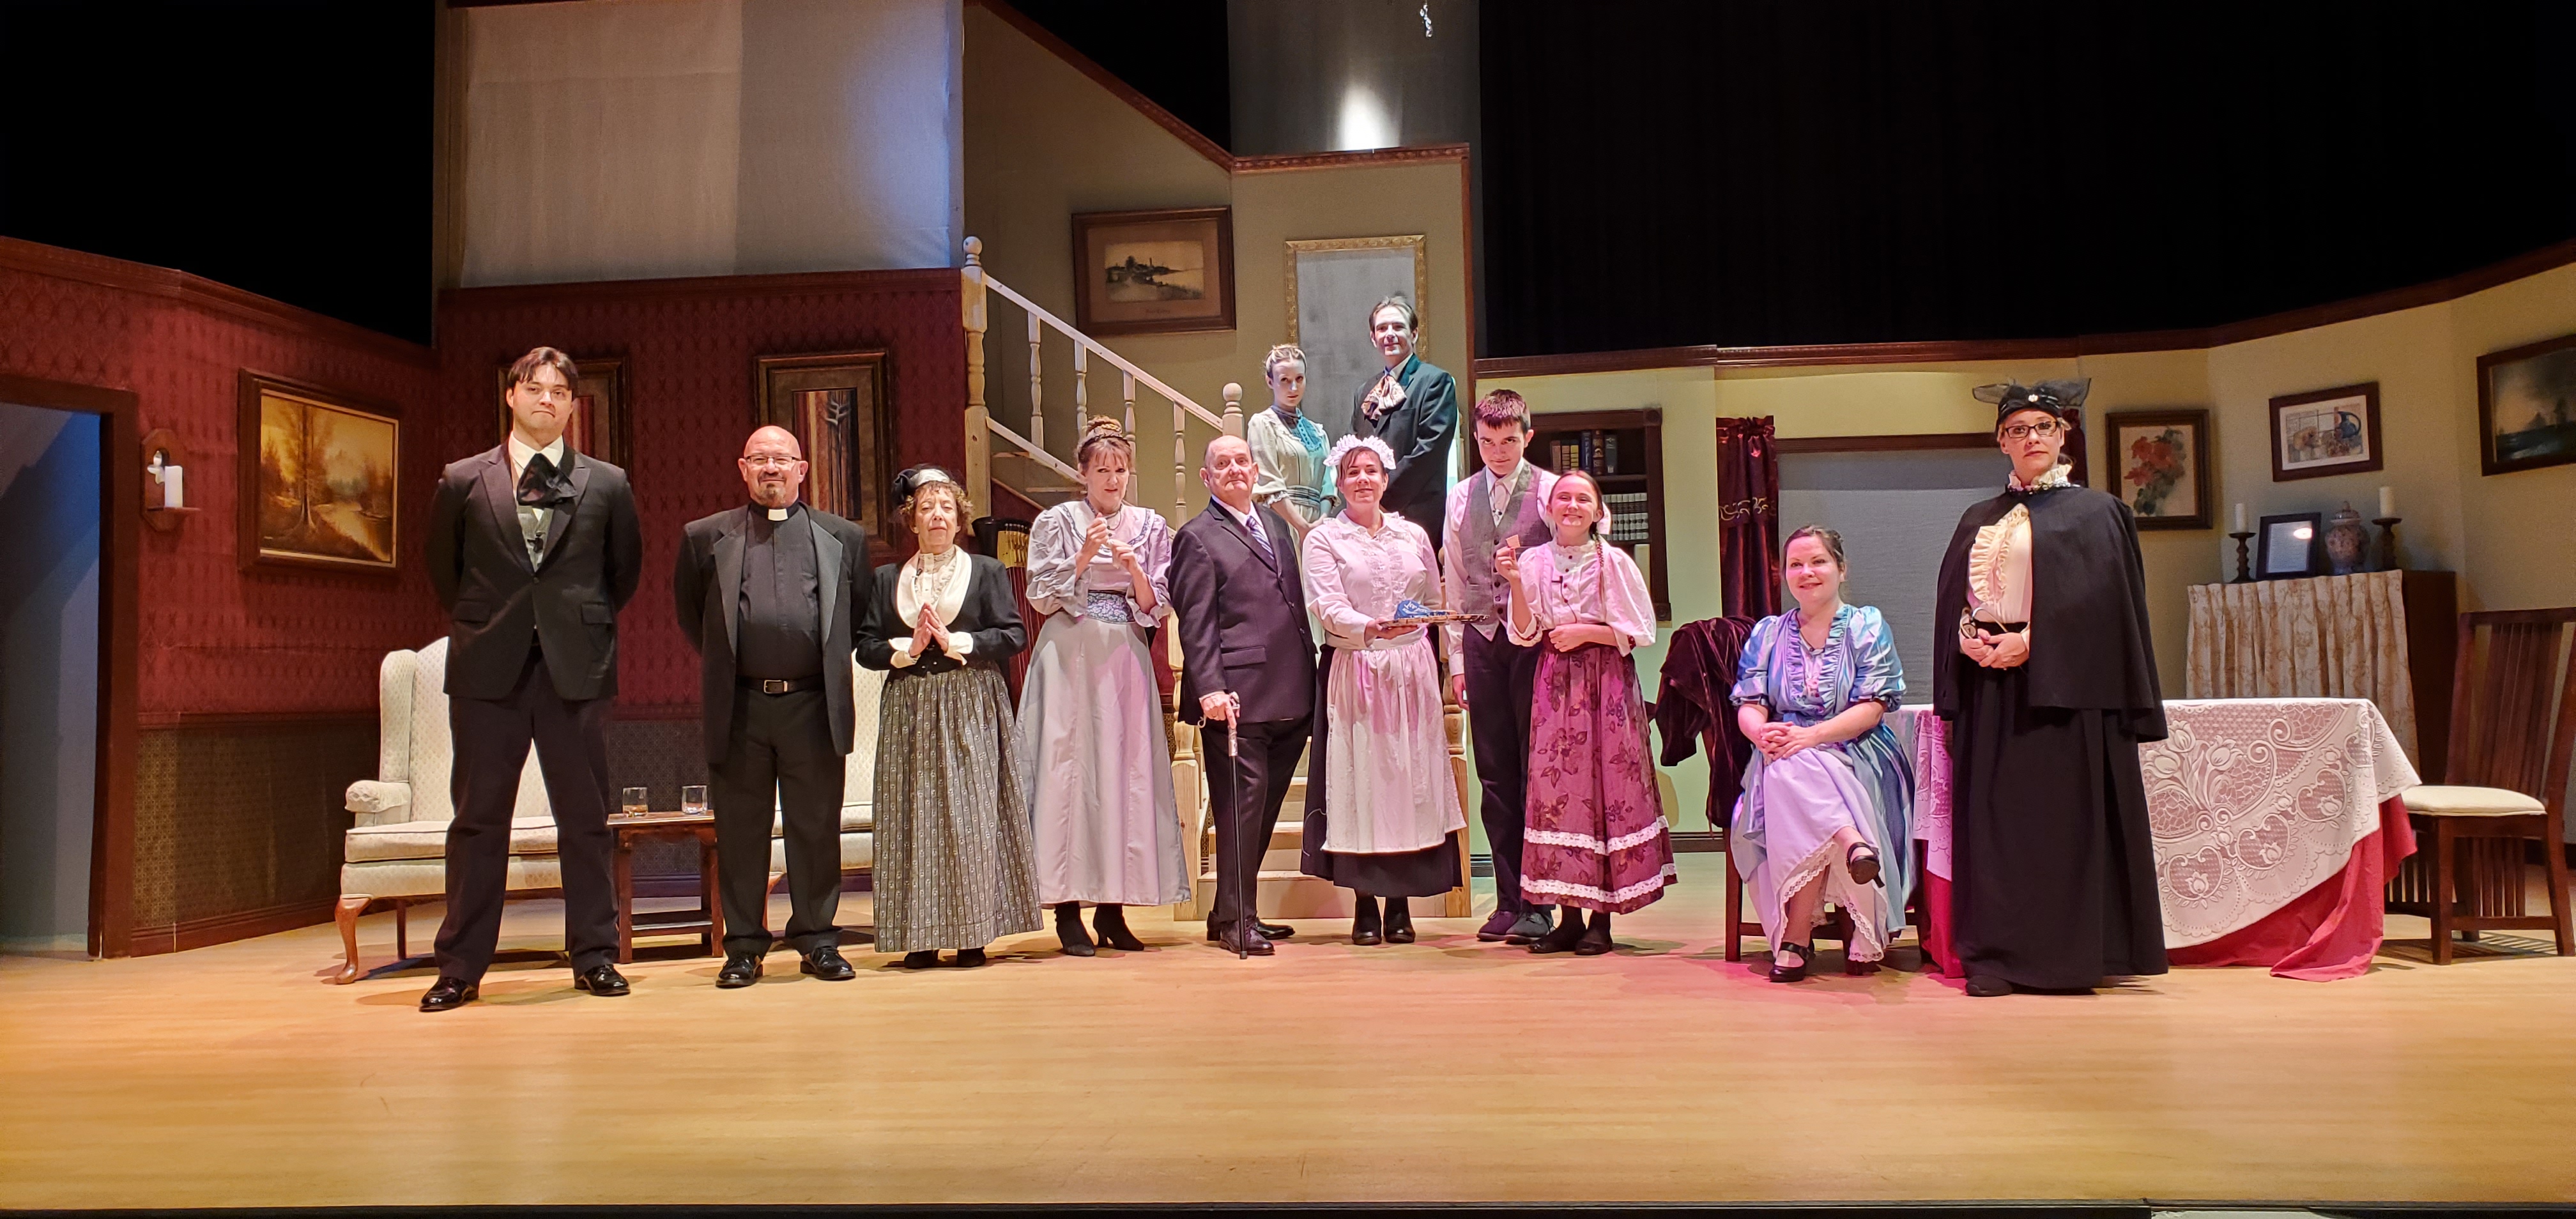 The entire cast standing, from left to right: a man in a black suit and ascot, a priest, a woman in Victorian dress, a woman in a long gray dress
       a man in a suit holding a cane, a maid in a white outfit, a tall boy in a white shirt and gray vest, a girl in a light rose top and rose colored dress, a woman in a metallic blue
       colored dress sitting, a woman in a black cloak and black dress standing. A teenage girl in a light green dress and a teenage boy in a gray suit stand behind and up on the
       landing.